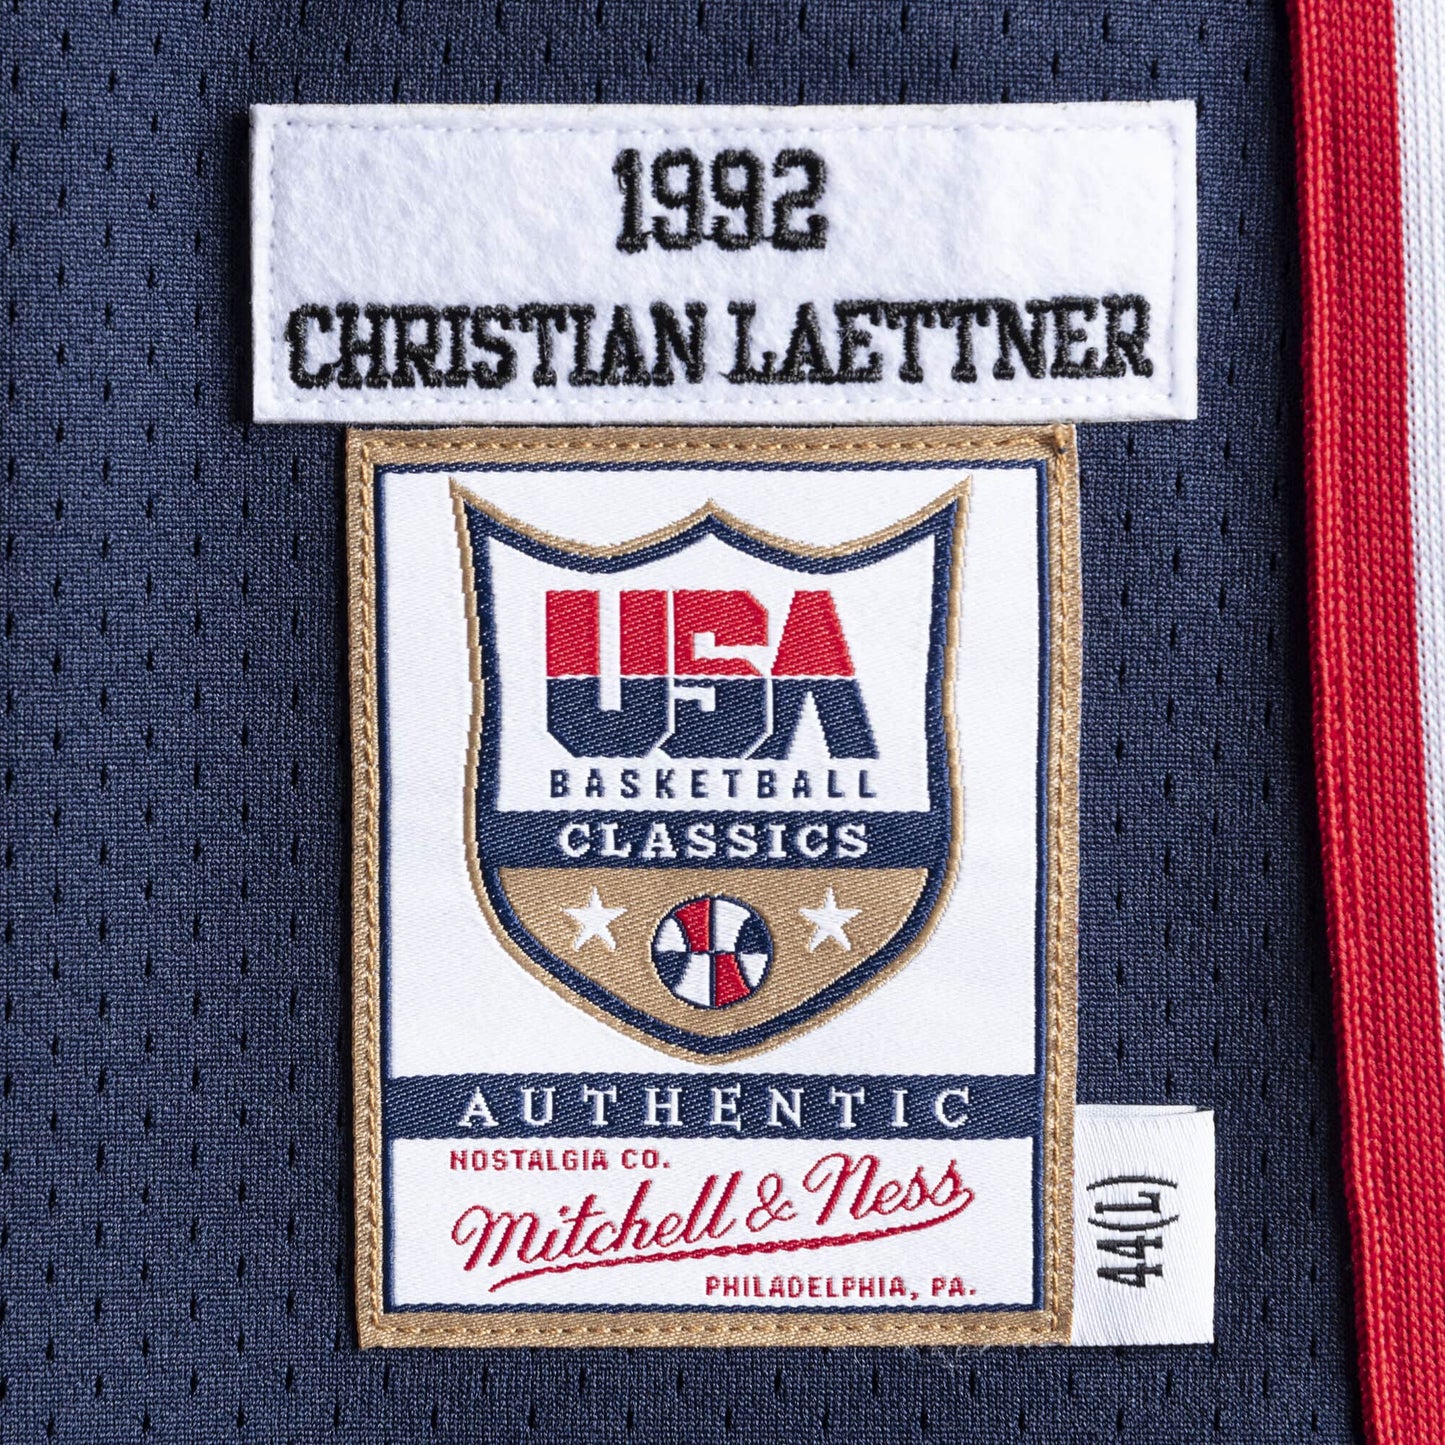 Authentic Jersey Team USA 1992 Christian Laettner